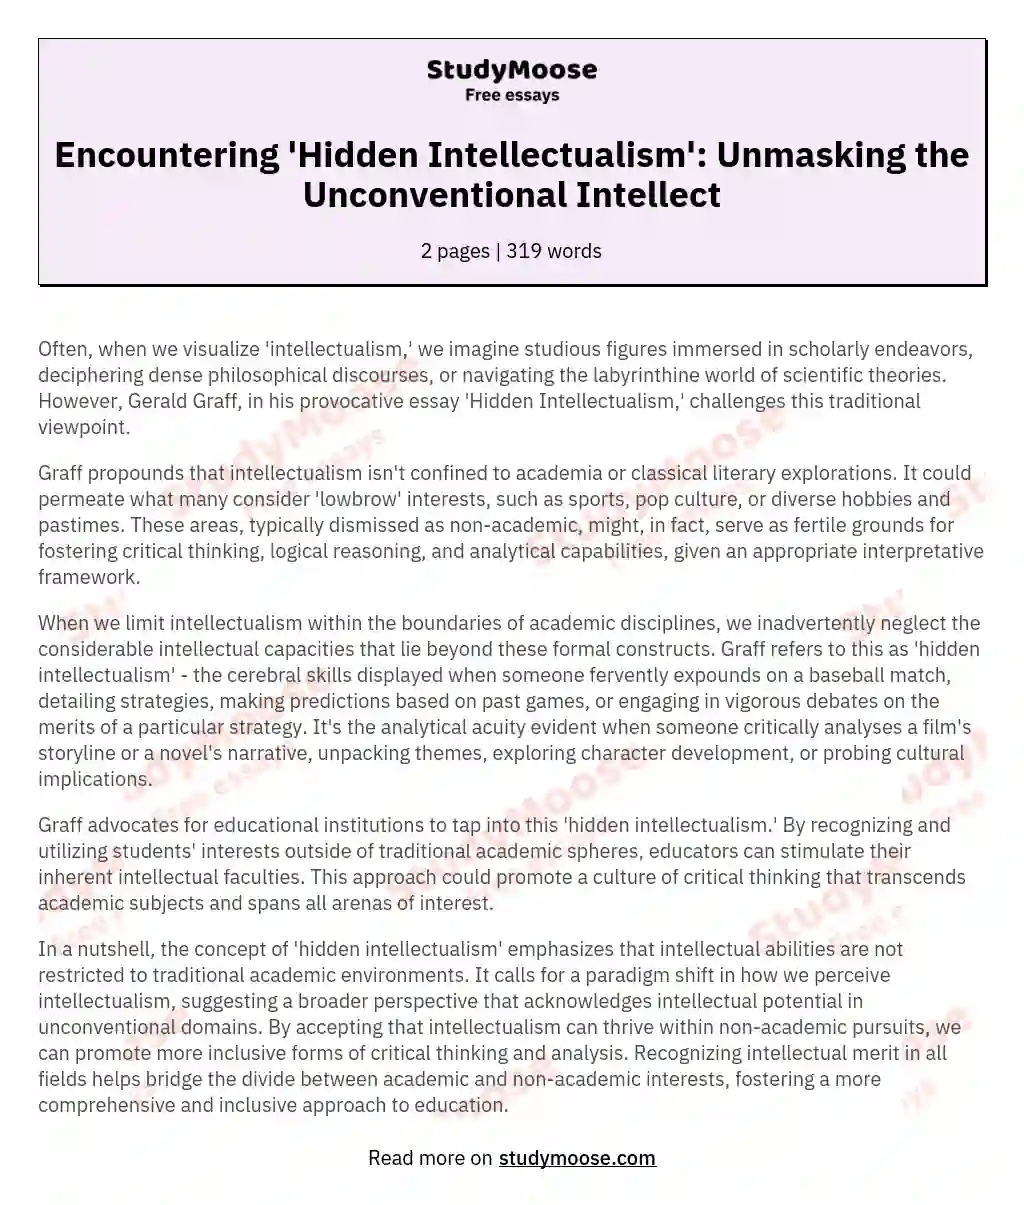 Encountering 'Hidden Intellectualism': Unmasking the Unconventional Intellect essay